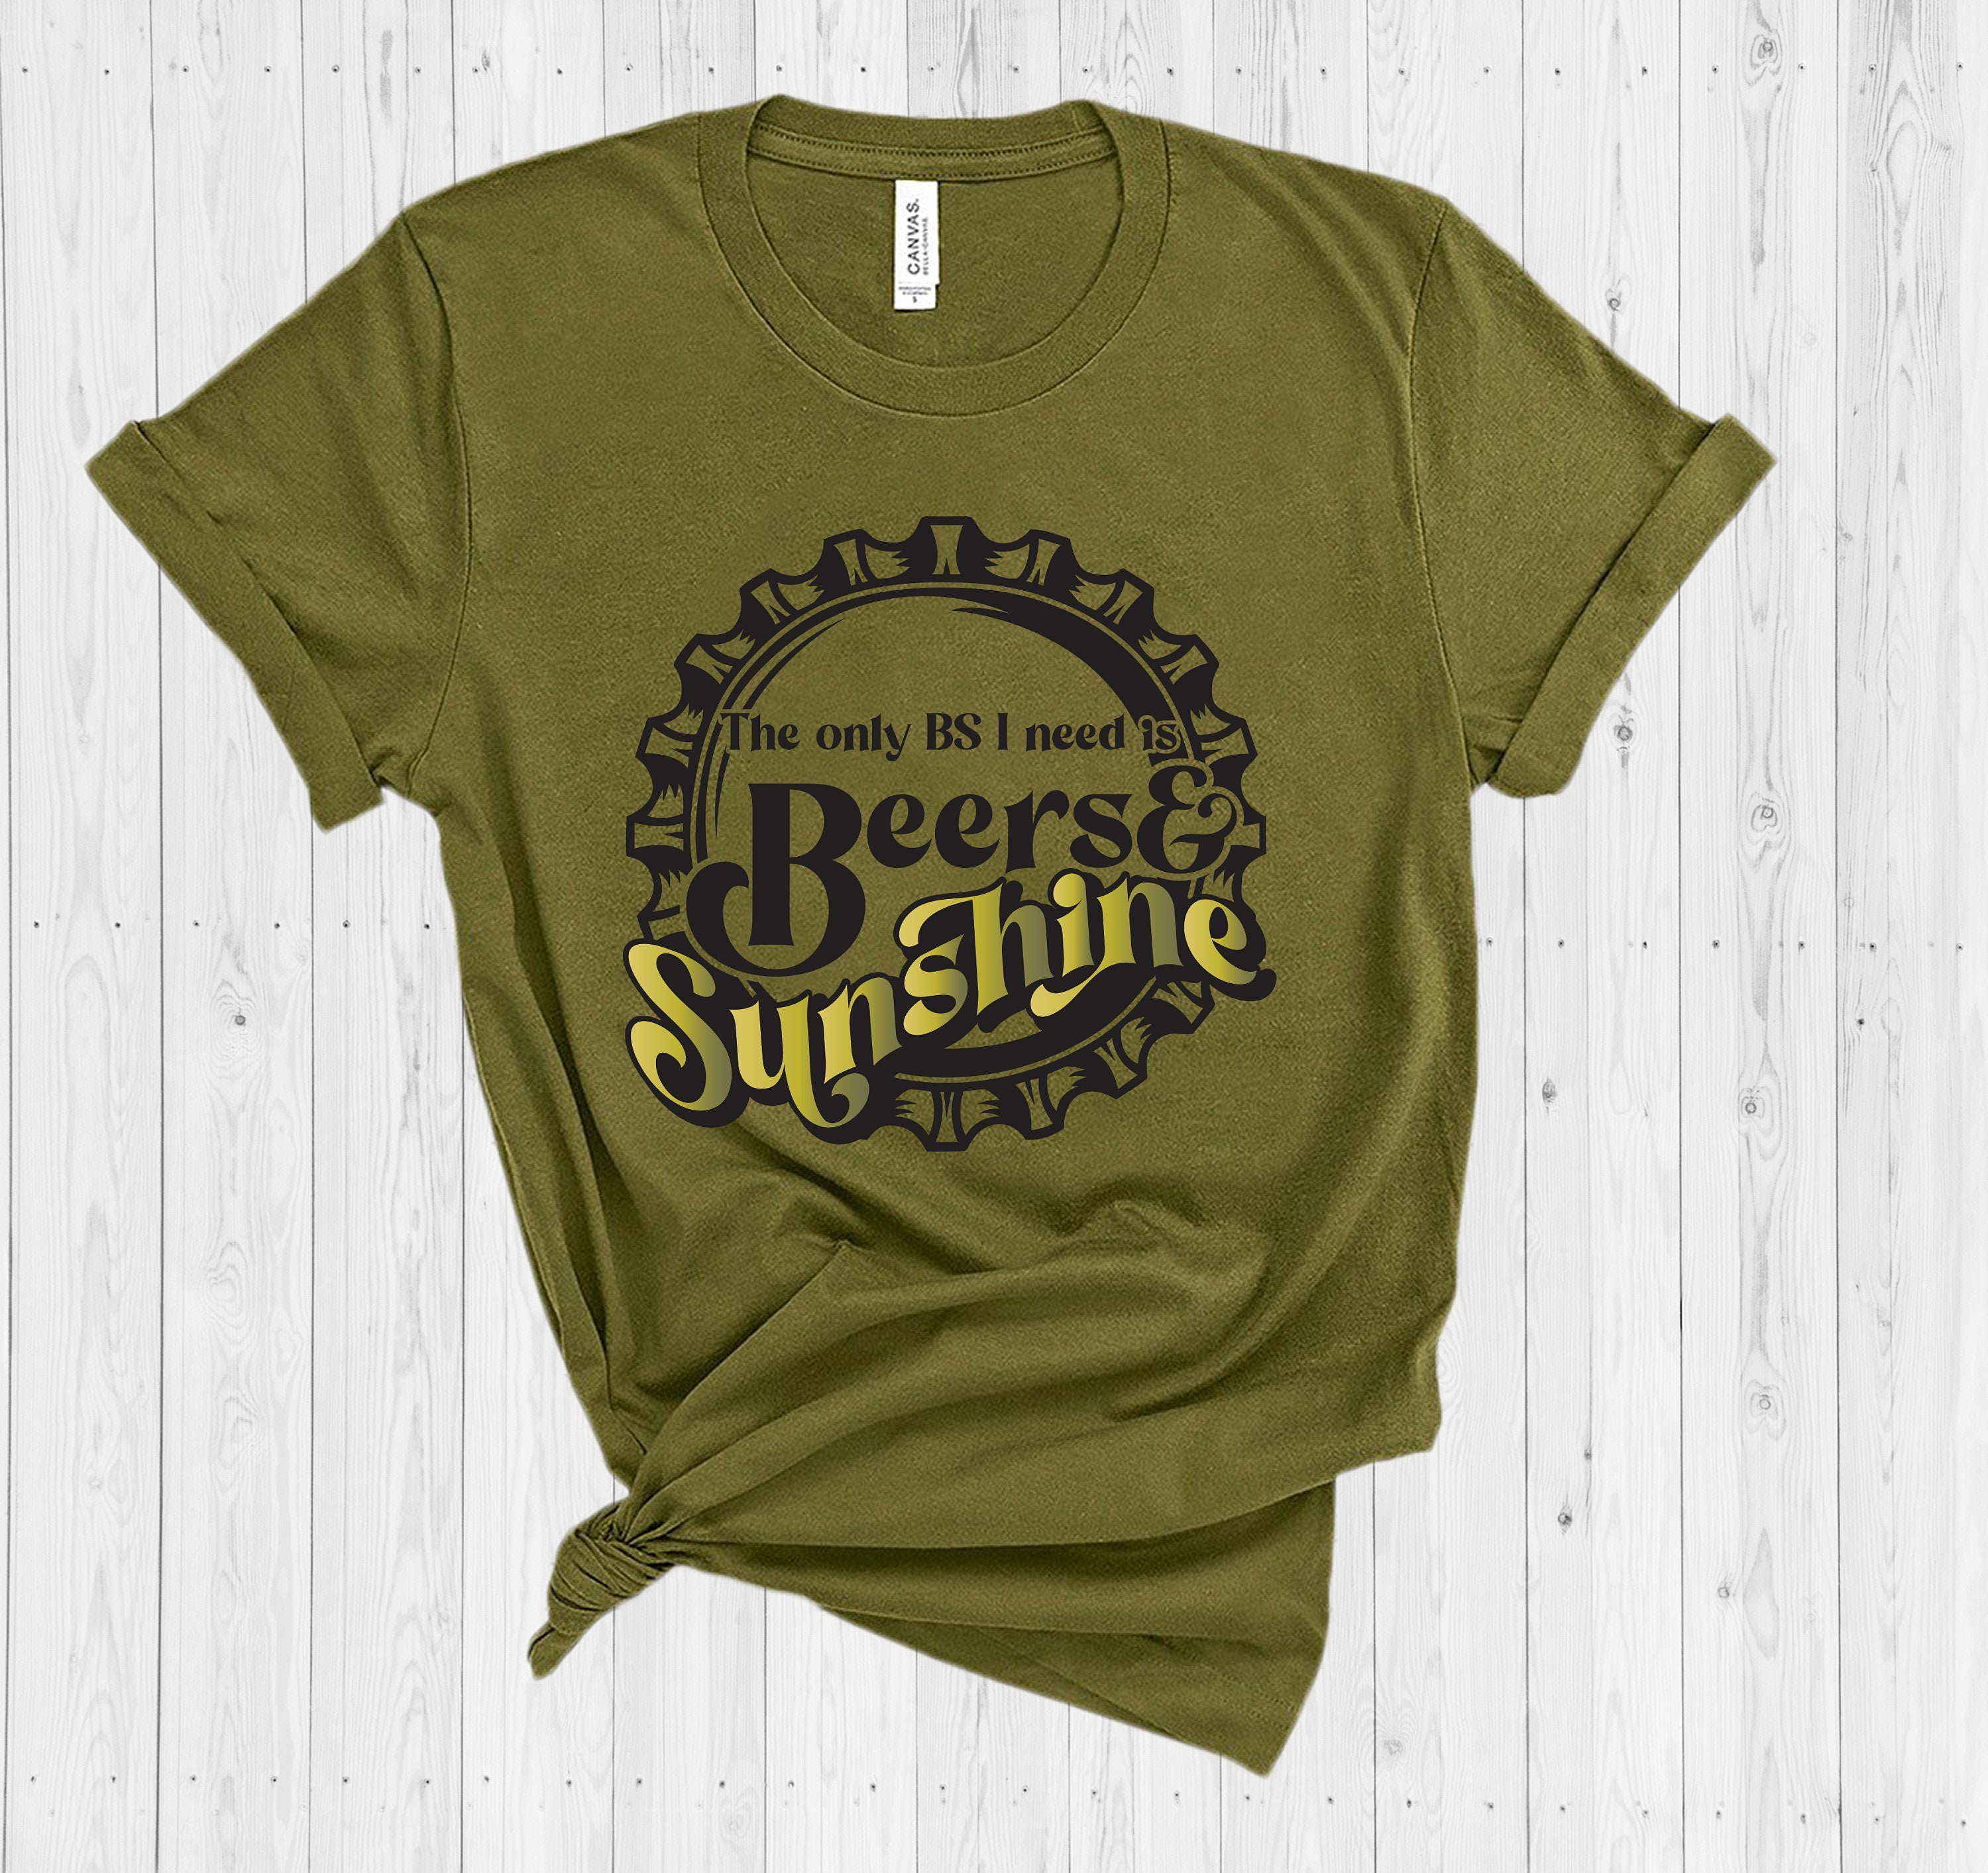 The Only BS I Need Is Beer and Sunshine - Funny Tee Shirt Dark Grey Heather / L